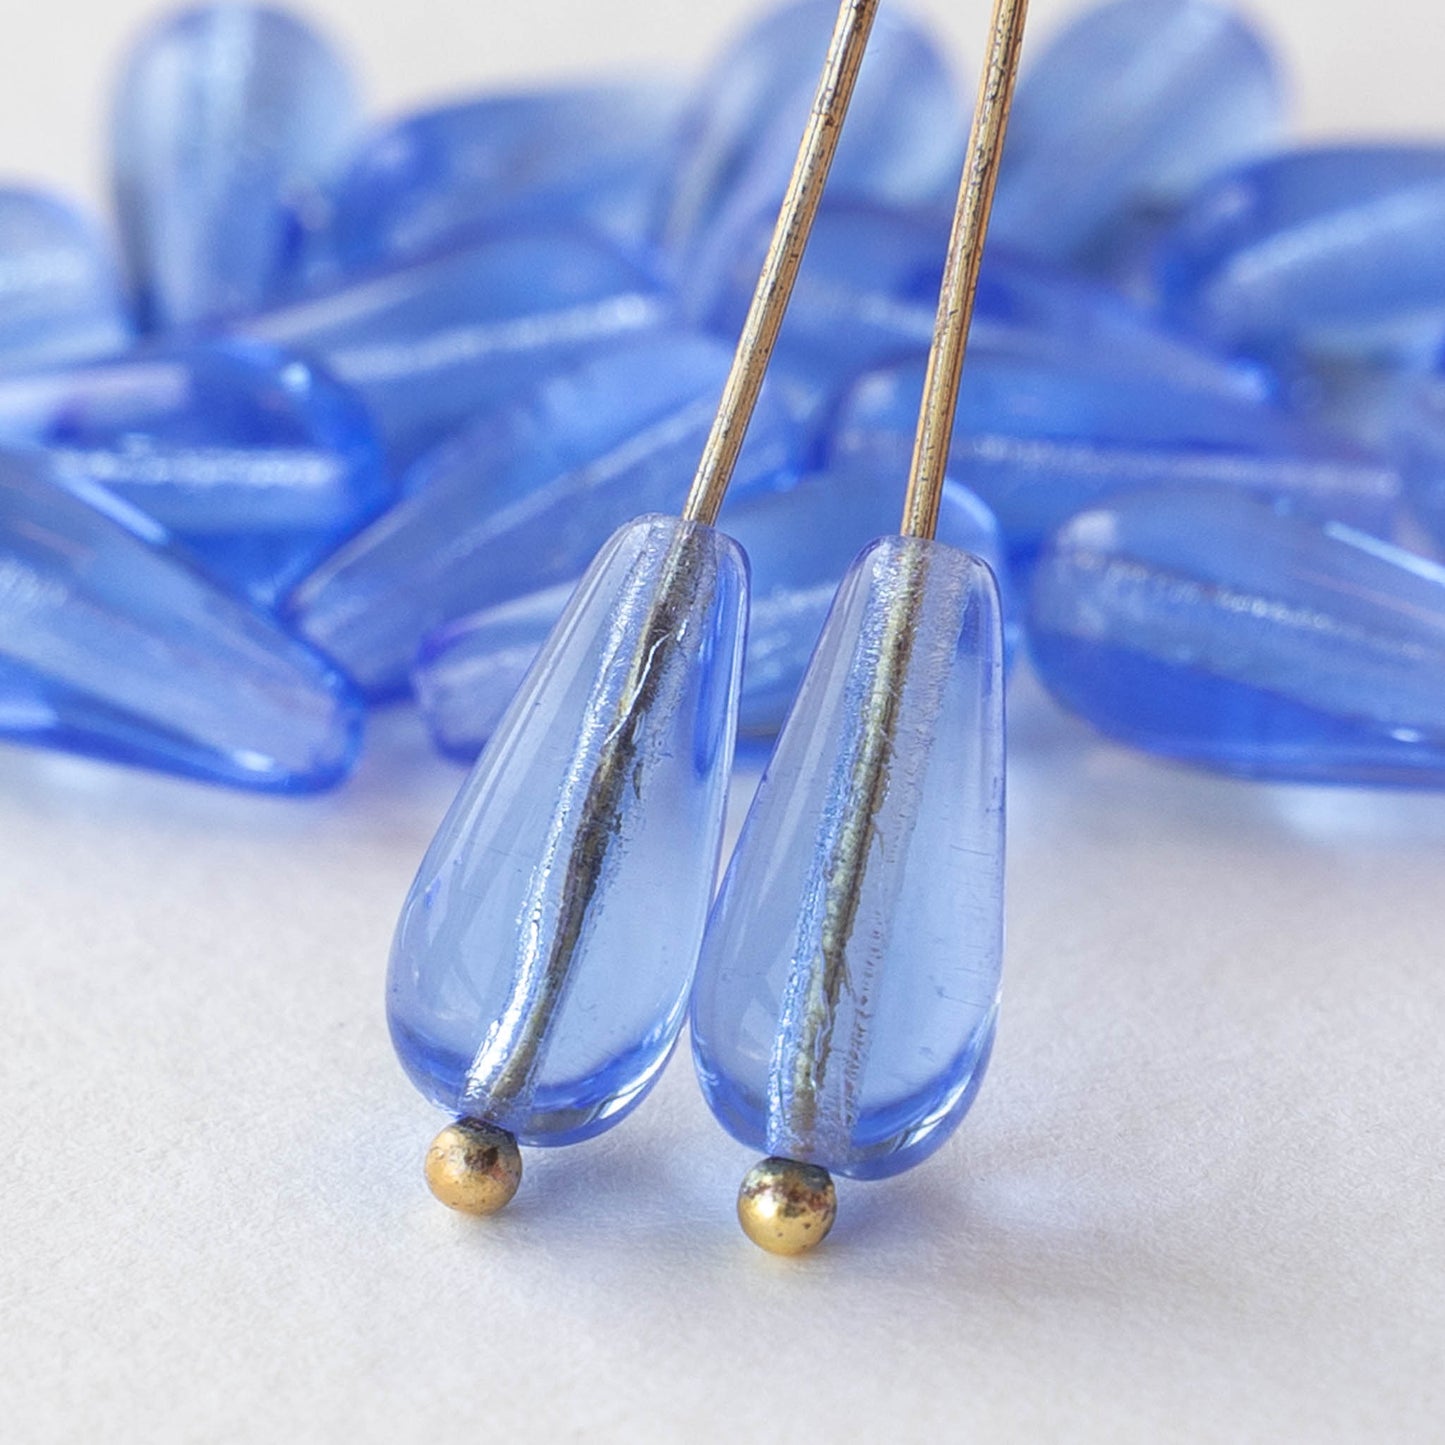 Load image into Gallery viewer, 6x13mm Long Drilled Drops - Light Blue Glass Beads - 20 Beads
